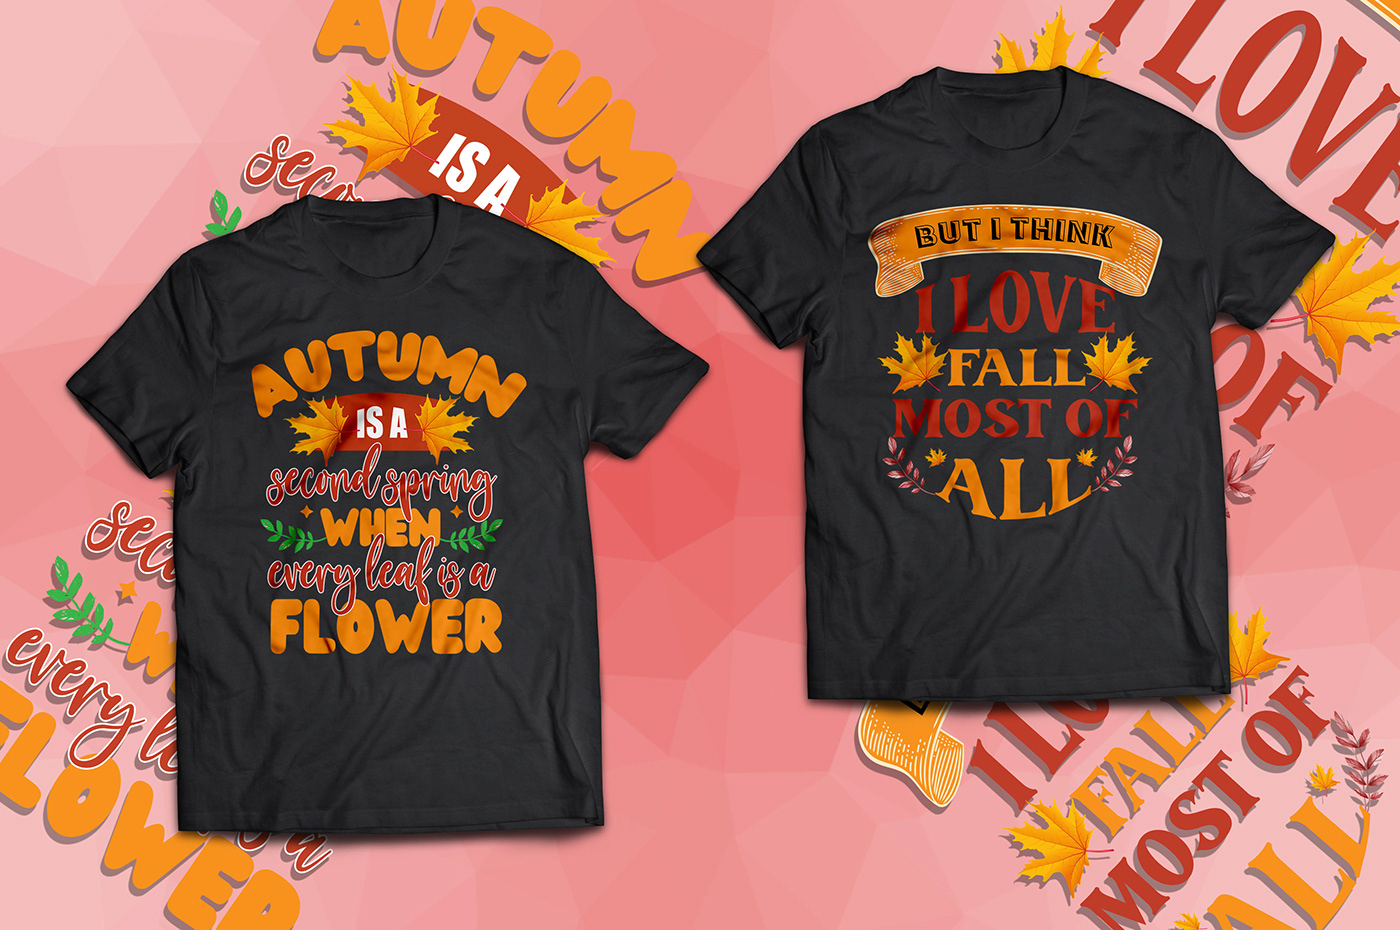 Extraordinary beautiful Fall session tshirt design shirts are beautiful and attractive for everyone.